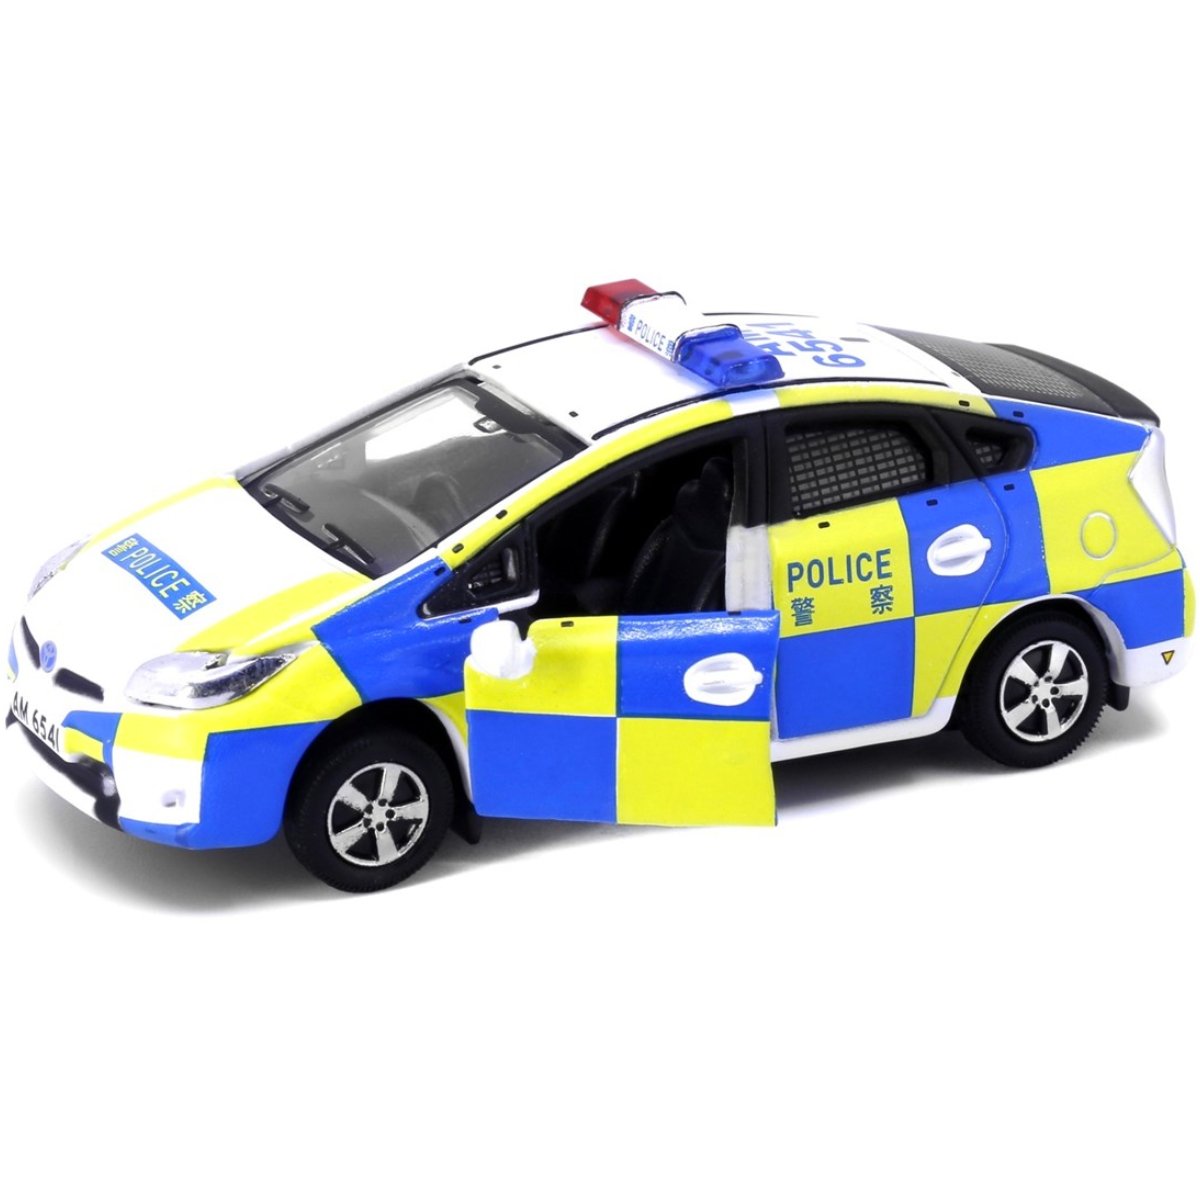 Tiny Models Toyota Prius Hong Kong Police (1:64 Scale) - Phillips Hobbies